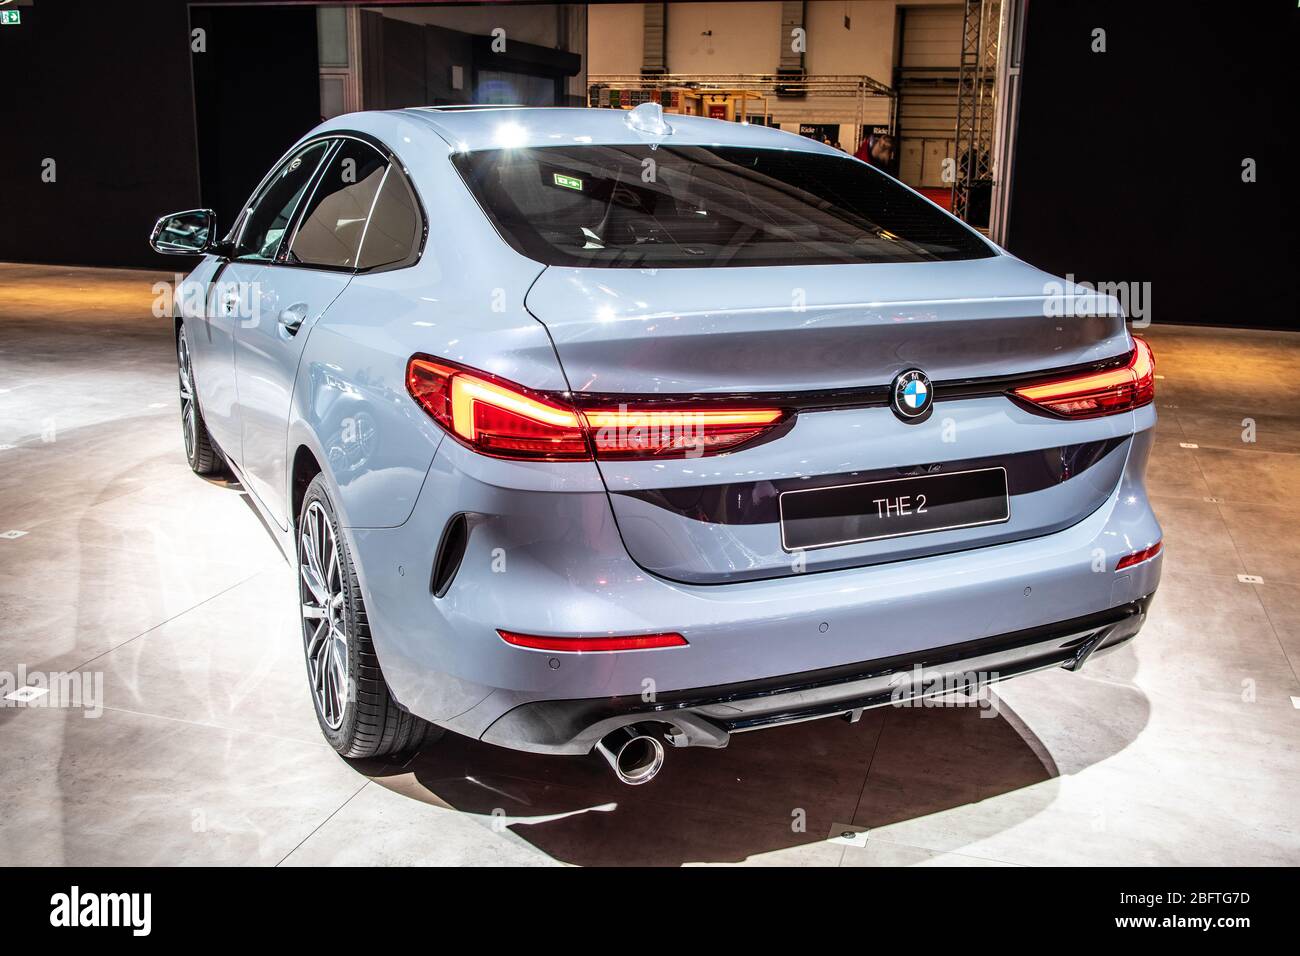 Brussels, Belgium, Jan 09, 2020: BMW 2 Series Gran Coupe 218i at Brussels Motor Show, Second generation, F44, subcompact executive car produced by BMW Stock Photo